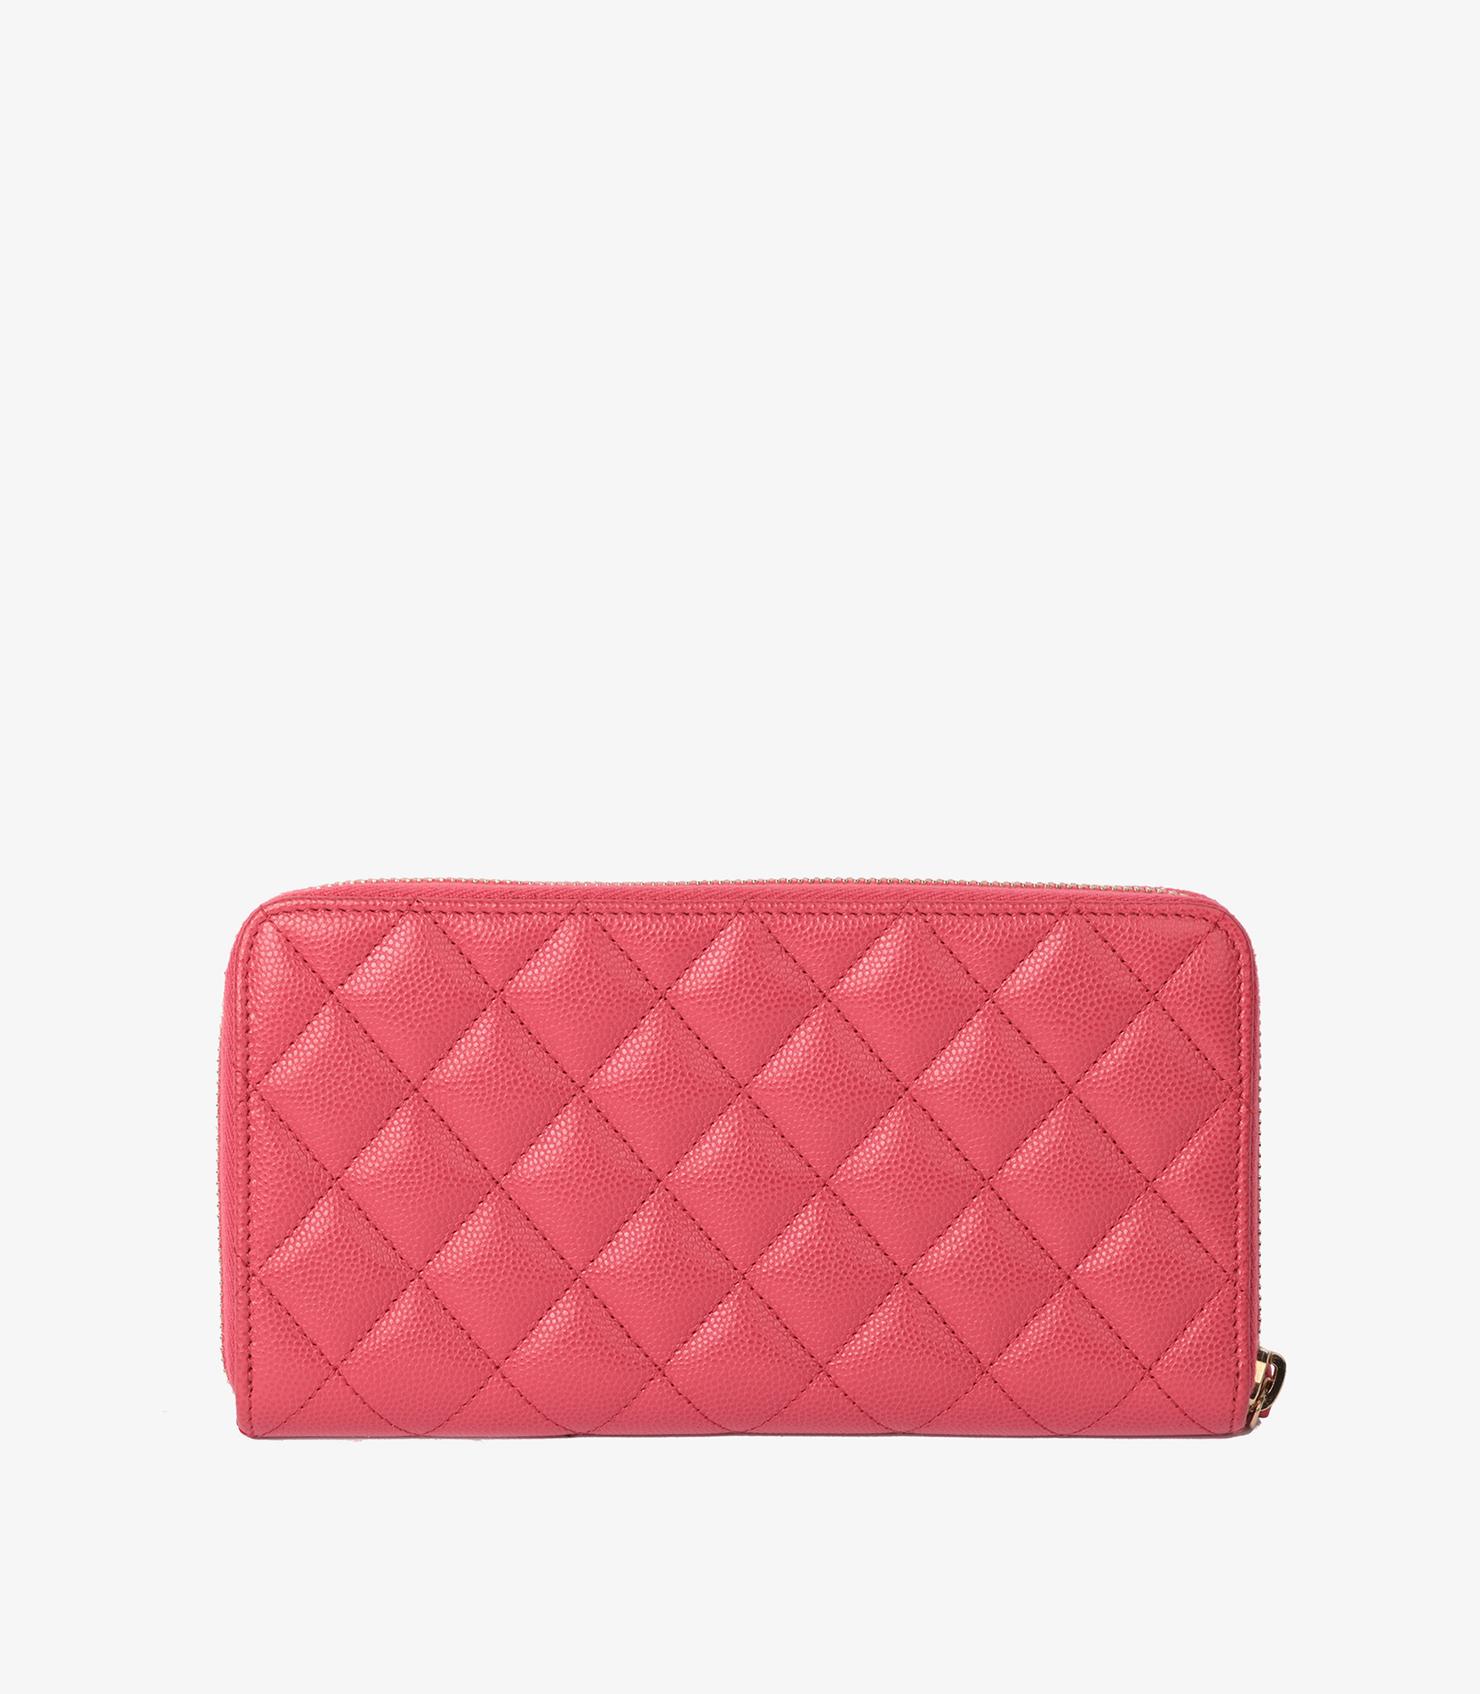 Chanel Pink Quilted Caviar Classic Long Zipped Wallet

Brand- Chanel
Model- Classic Long Zipped Wallet
Product Type- Wallet
Serial Number- 22******
Age- Circa 2017
Accompanied By- Chanel Box, Authenticity Card
Colour- Pink
Hardware-